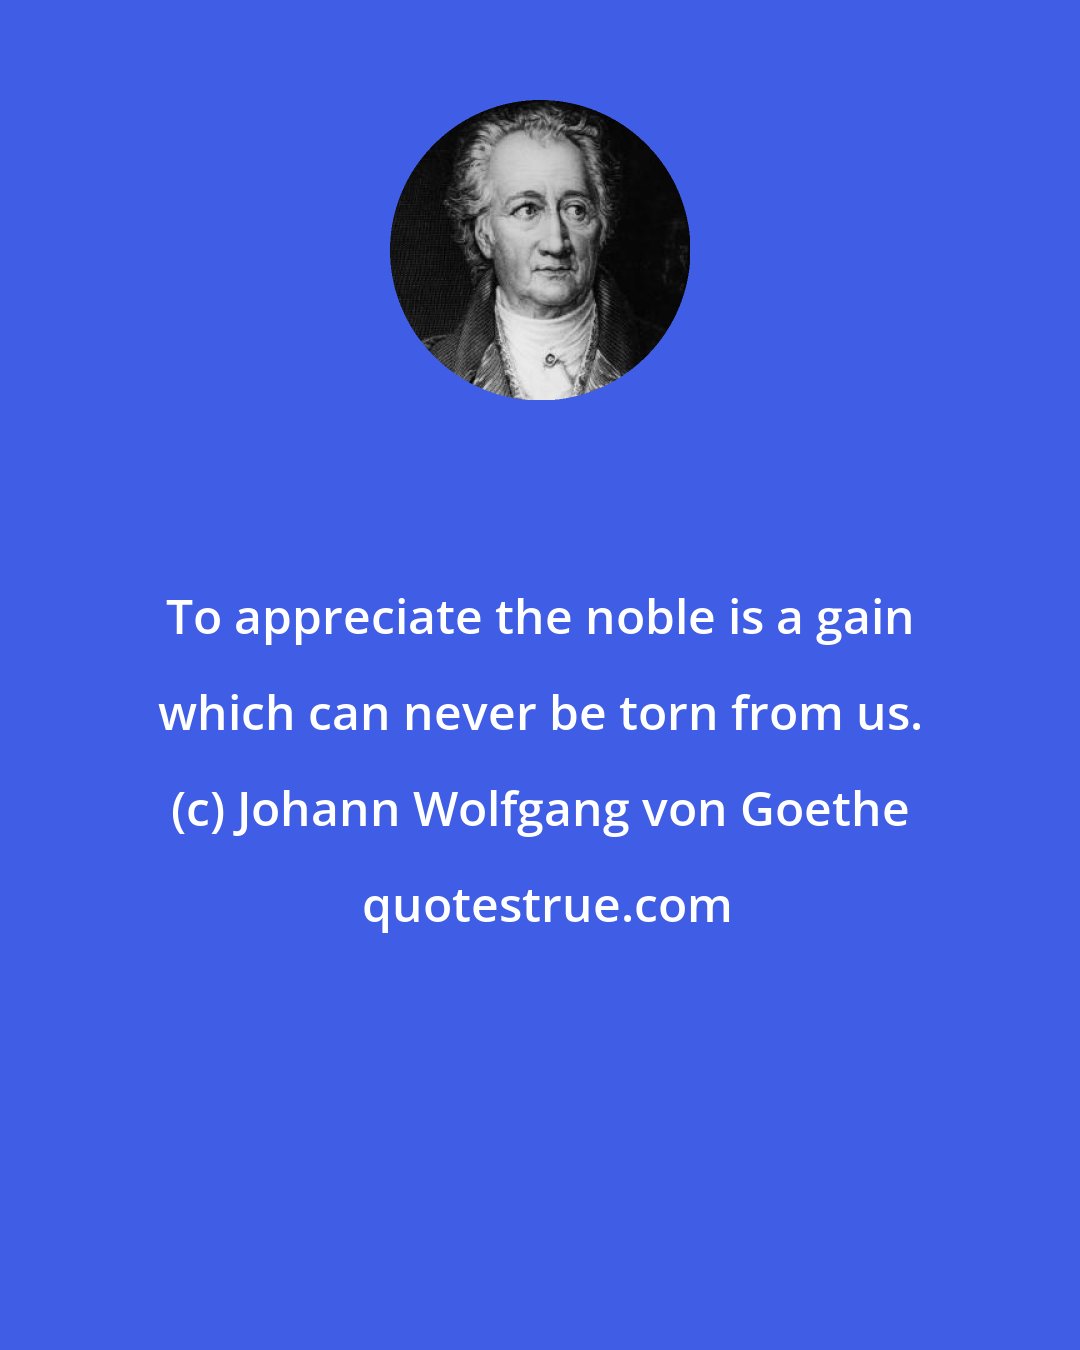 Johann Wolfgang von Goethe: To appreciate the noble is a gain which can never be torn from us.